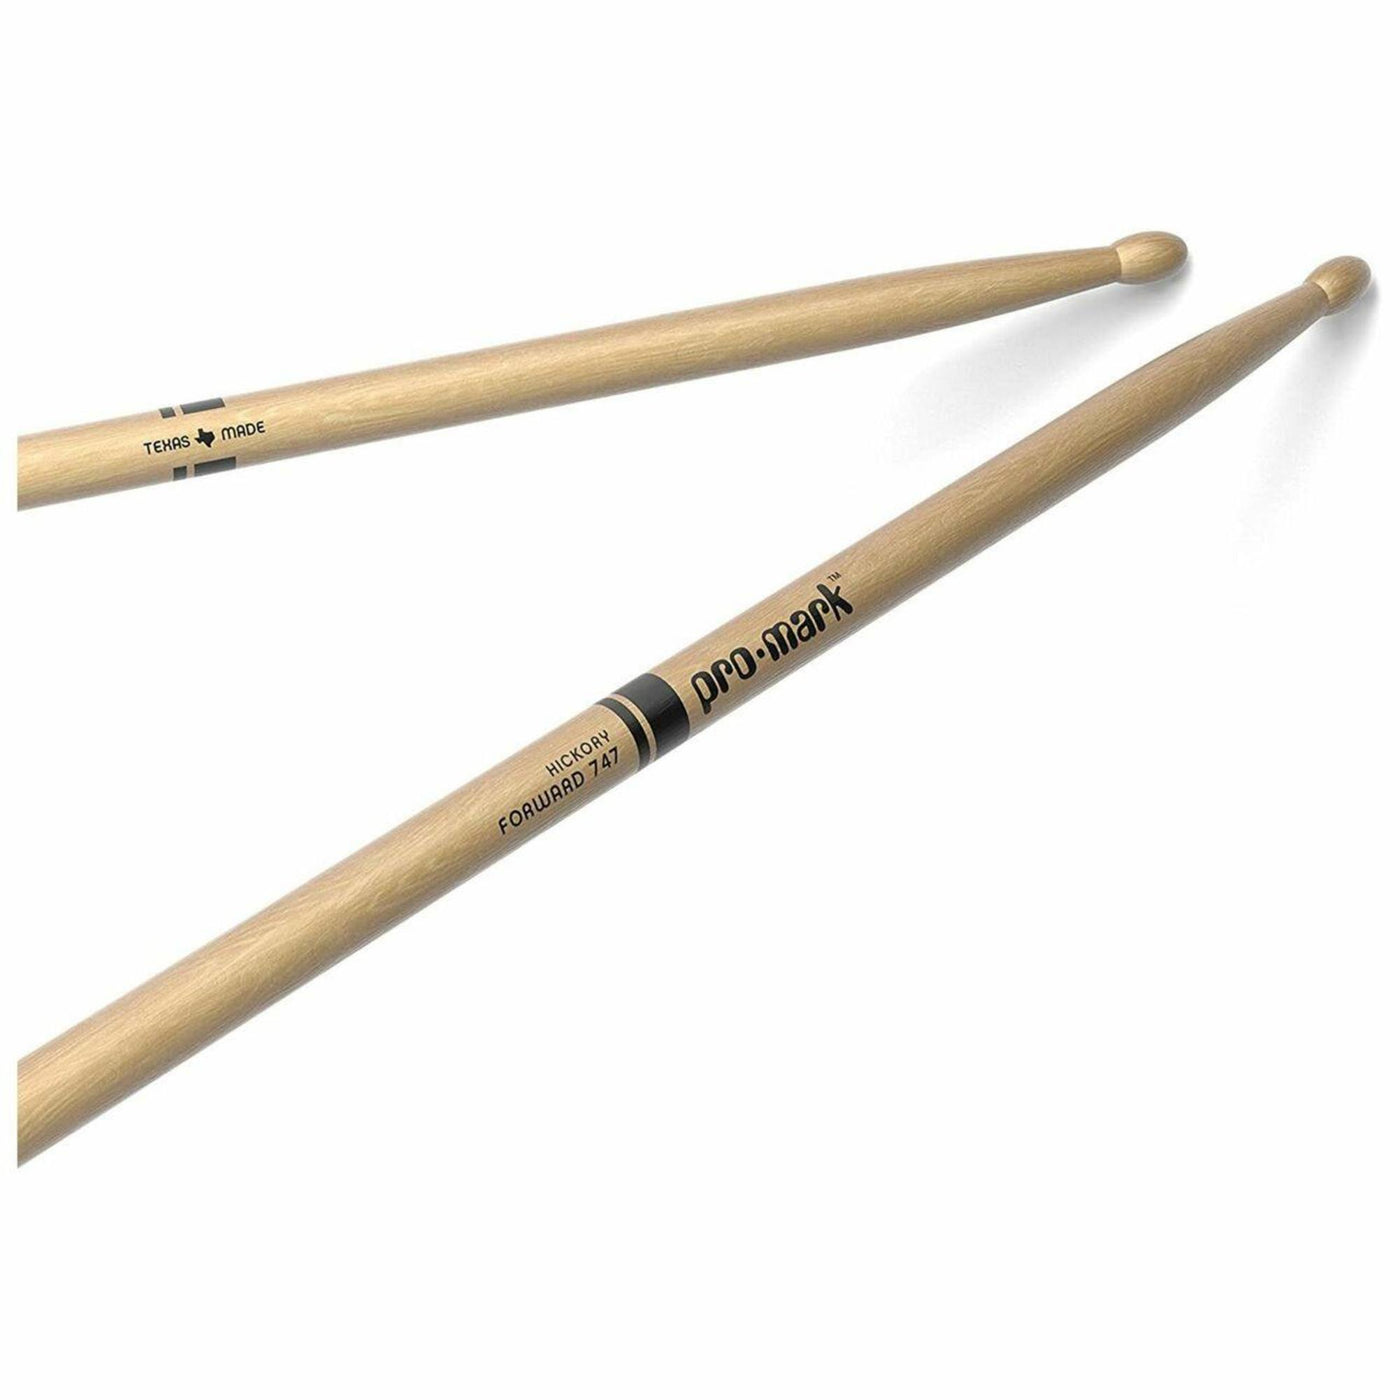 Promark Classic Forward 747 Hickory Drumsticks, Oval Wood Tip